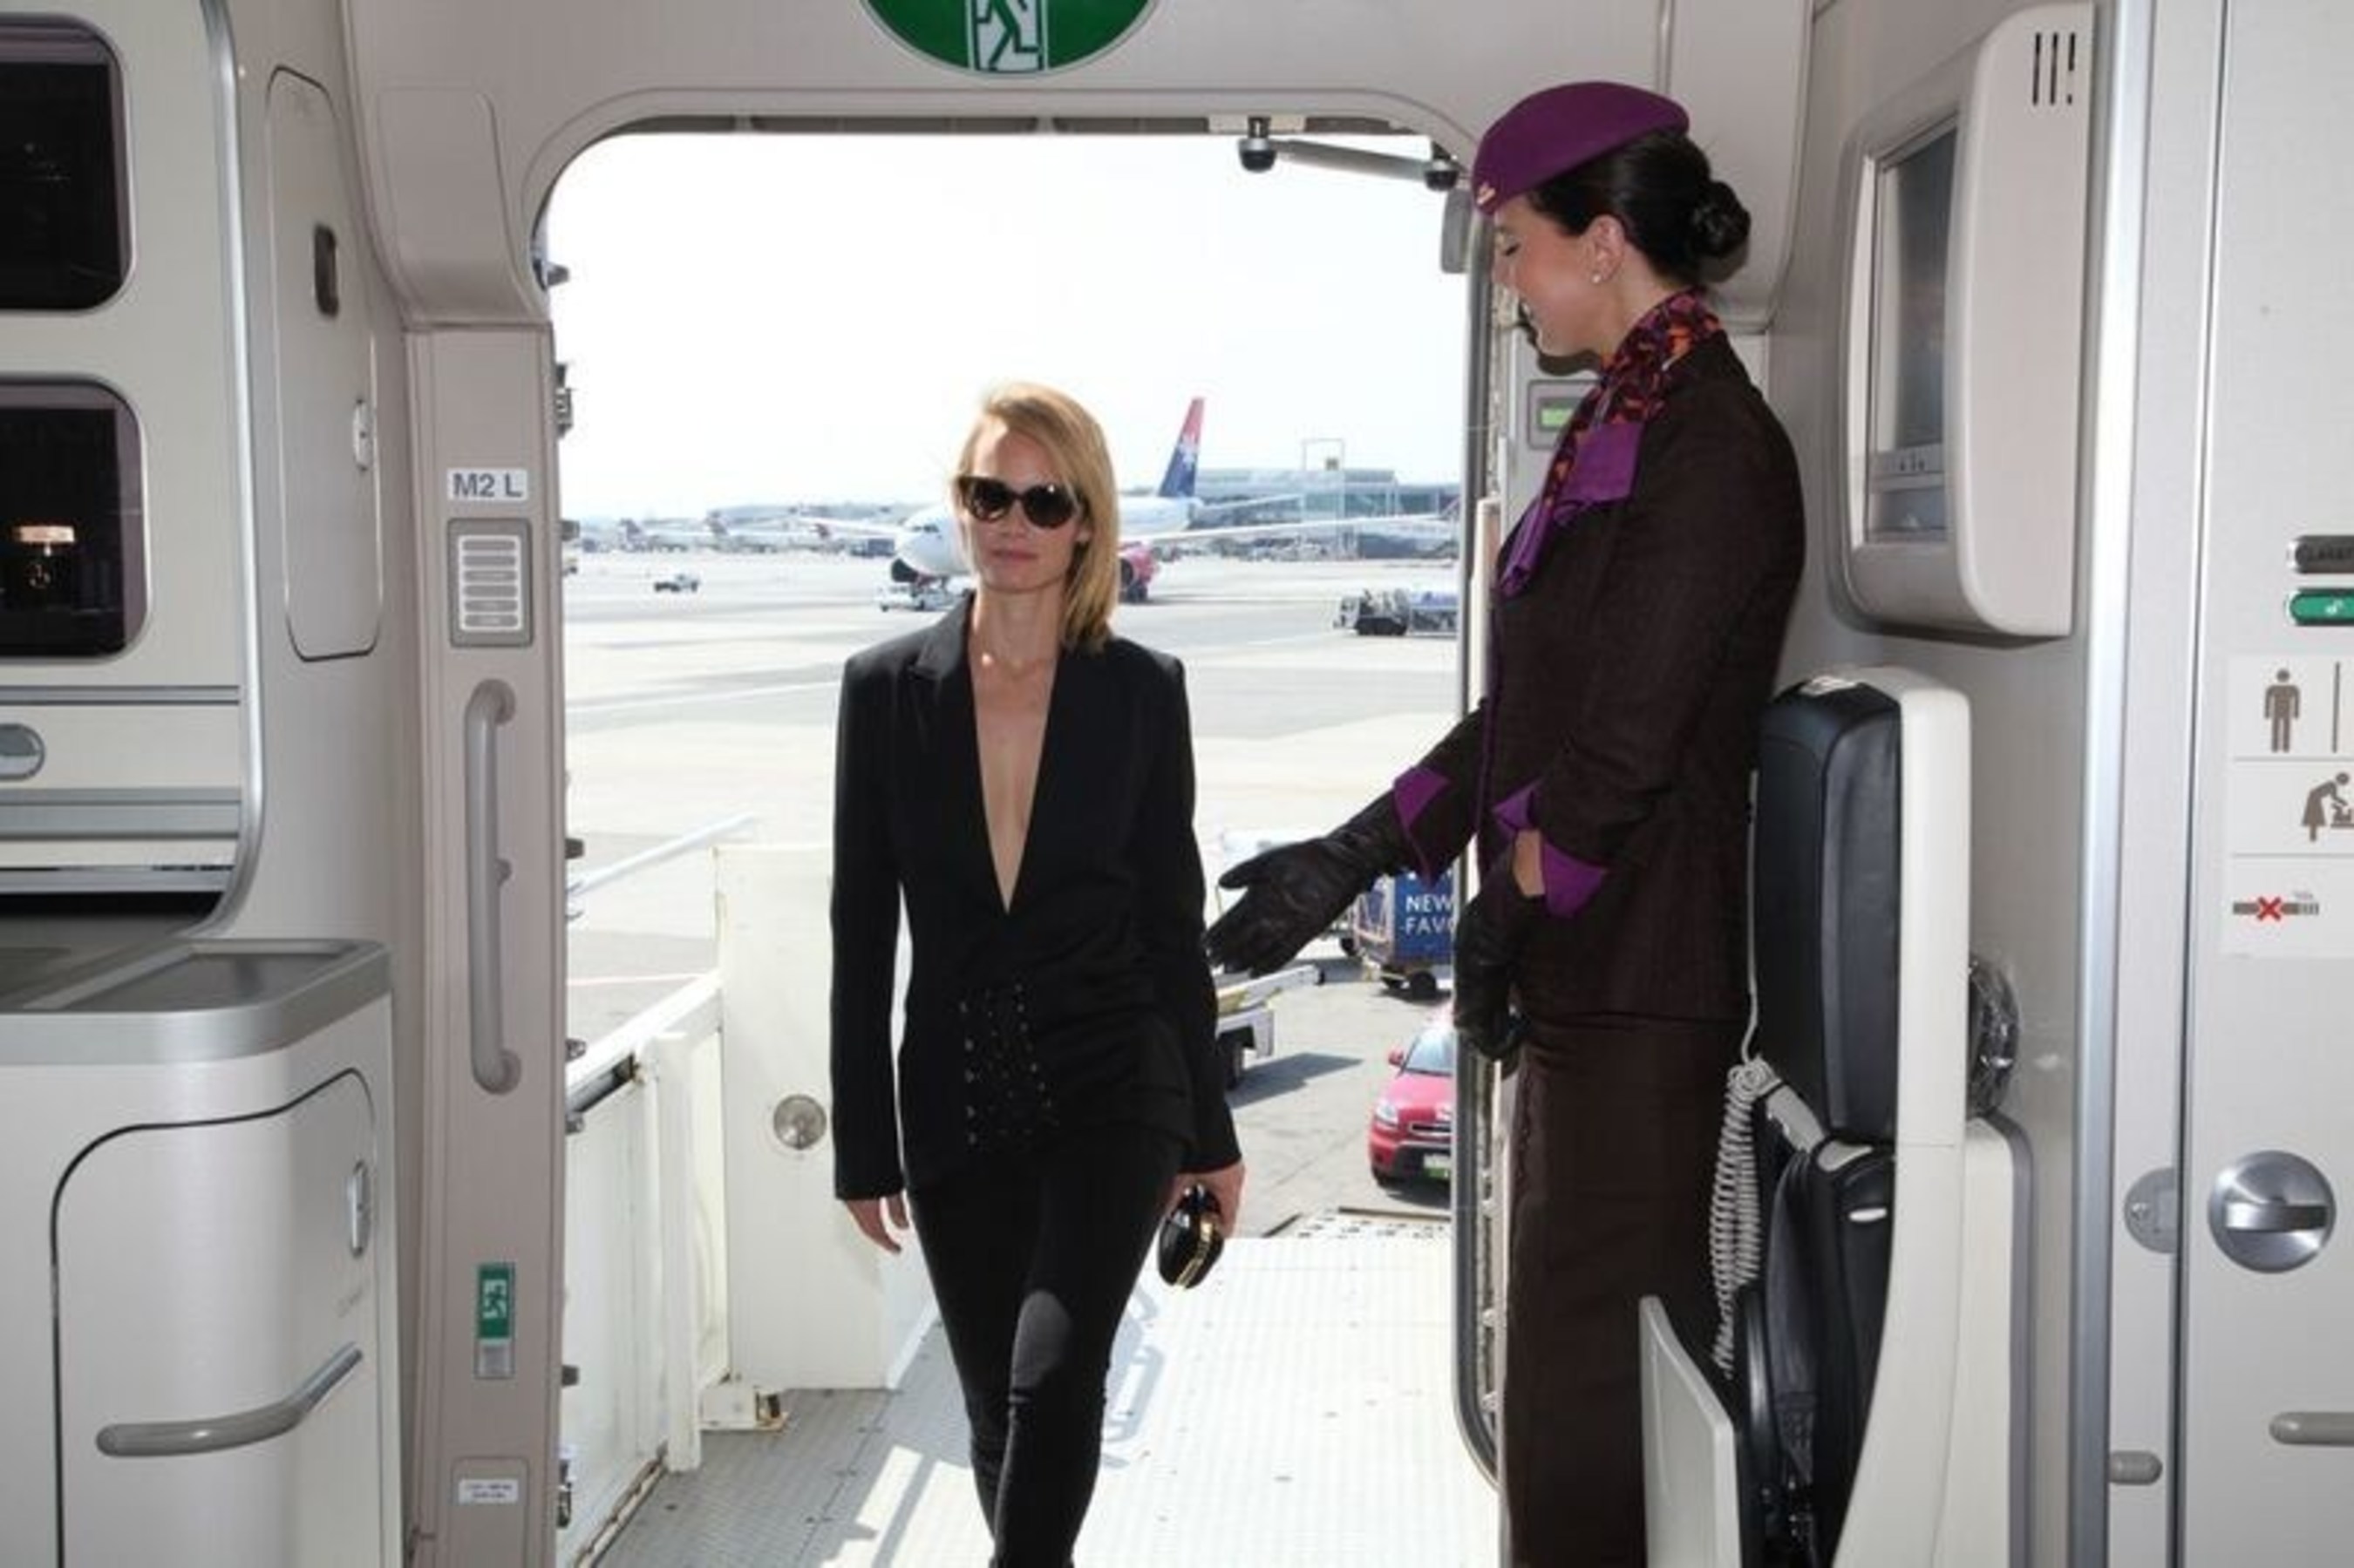 Supermodel Amber Valletta welcomed by Etihad Airways cabin onboard the airline's "NYFW: The Shows"-branded aircraft livery by cabin crew.